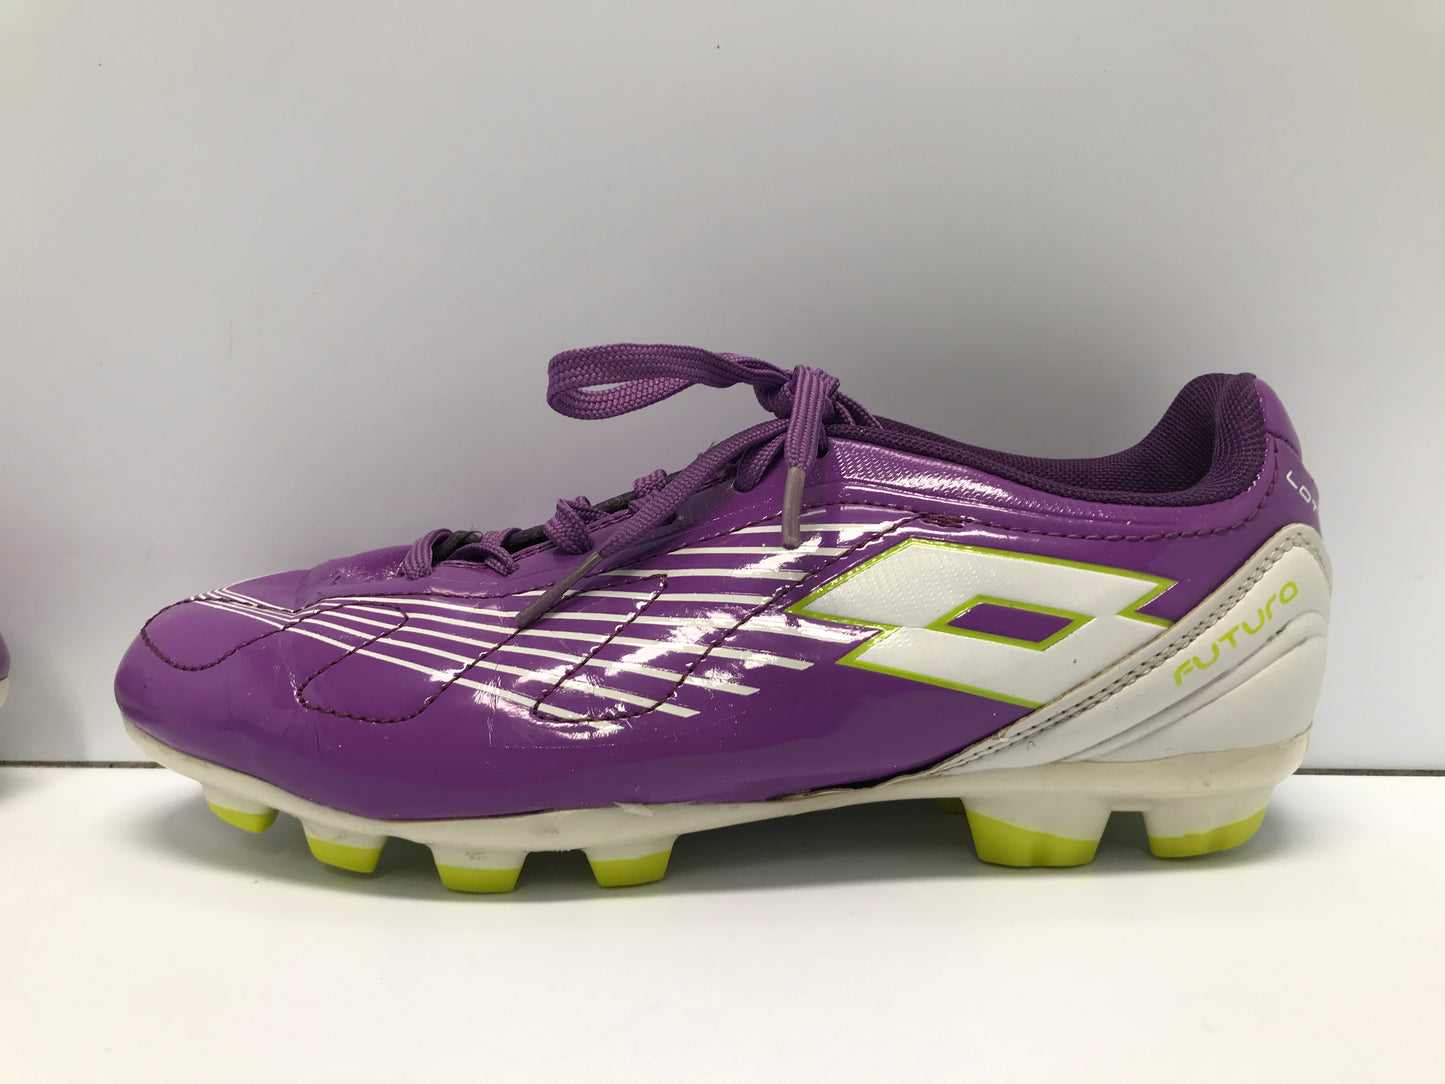 Soccer Shoes Cleats Child Size 4 Lotto Purple Lime White Excellent